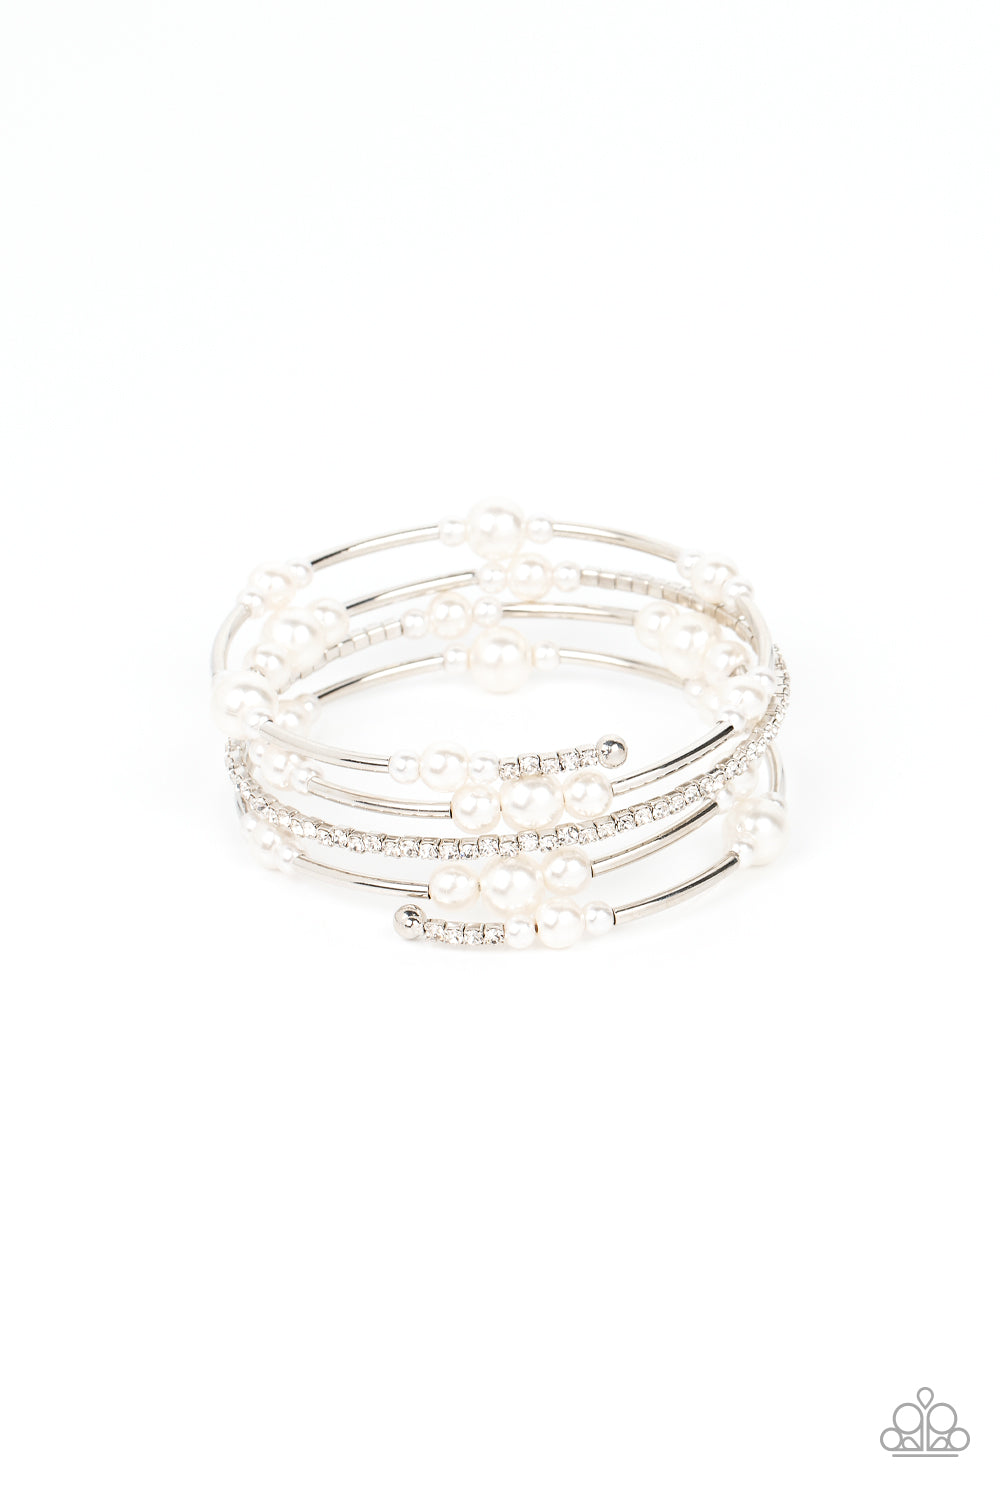 Marina Masterpiece White Bracelet - Paparazzi Accessories  Bubbly white pearls, cylindrical silver beads, and glassy white rhinestones are threaded along a coiled wire, resulting in a timeless infinity wrap bracelet around the wrist.  Sold as one individual bracelet.